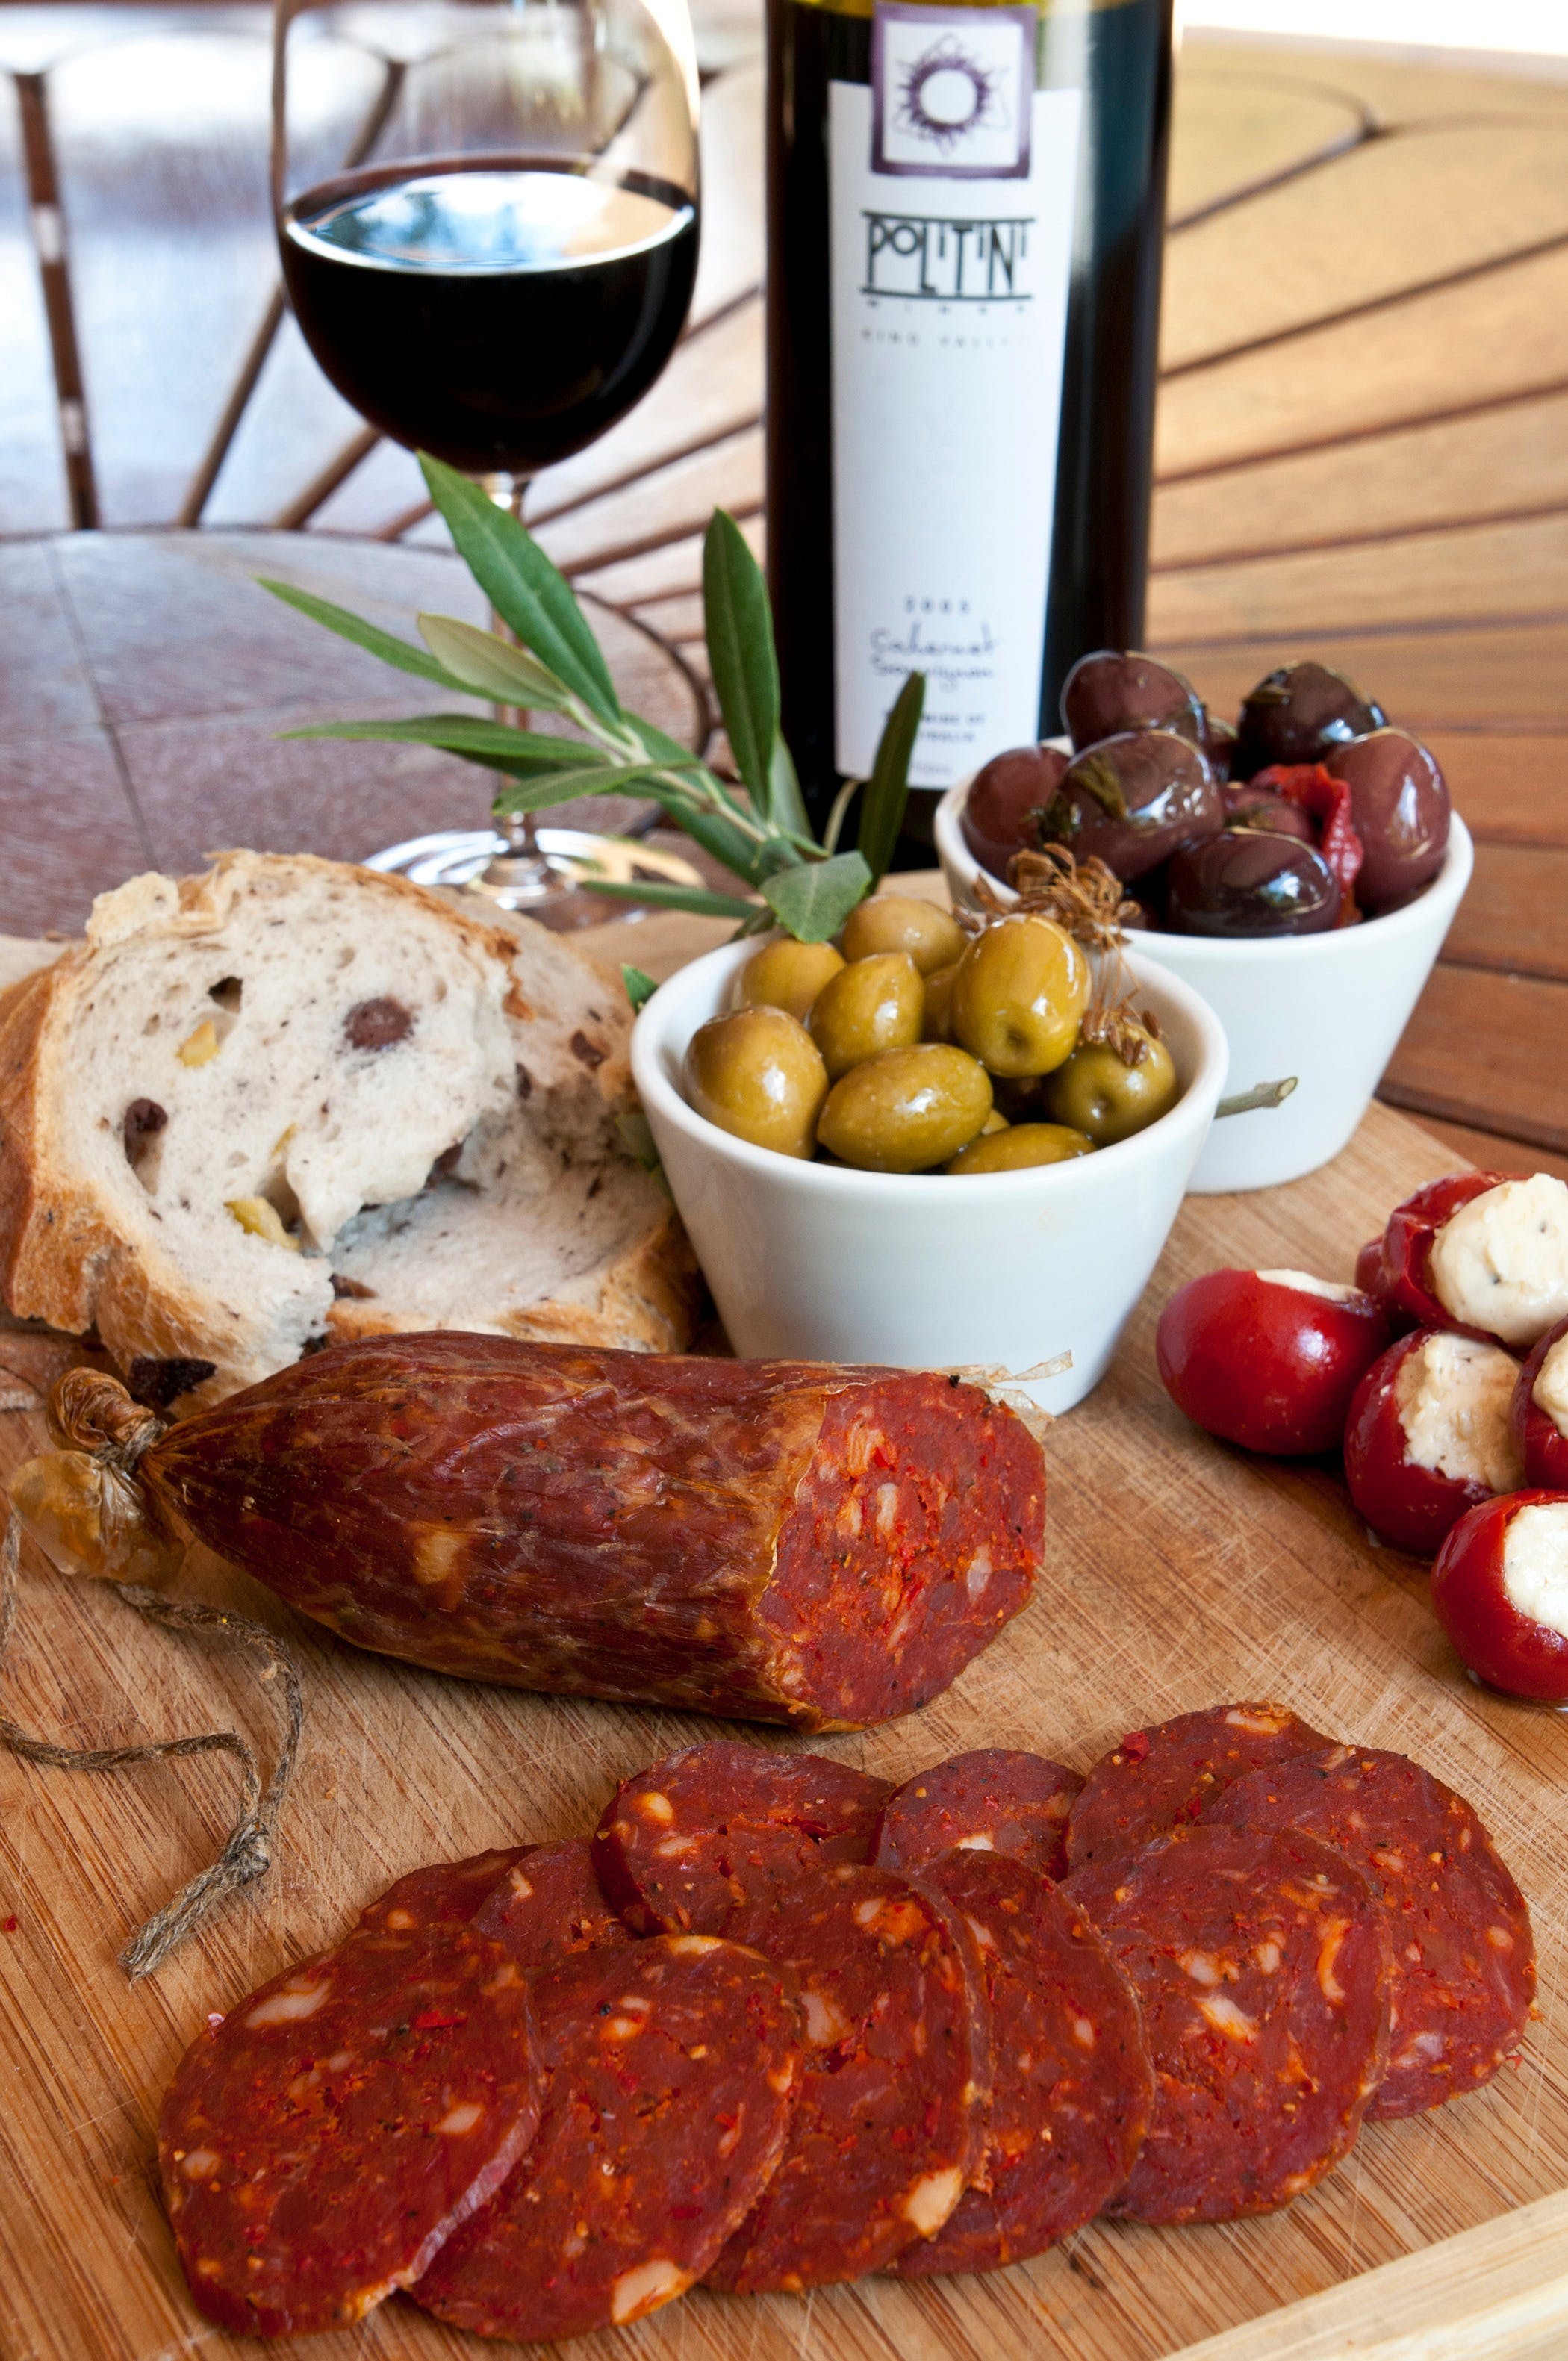 Salami and Salsicce Making classes at Politini Wines - Restaurants Sydney